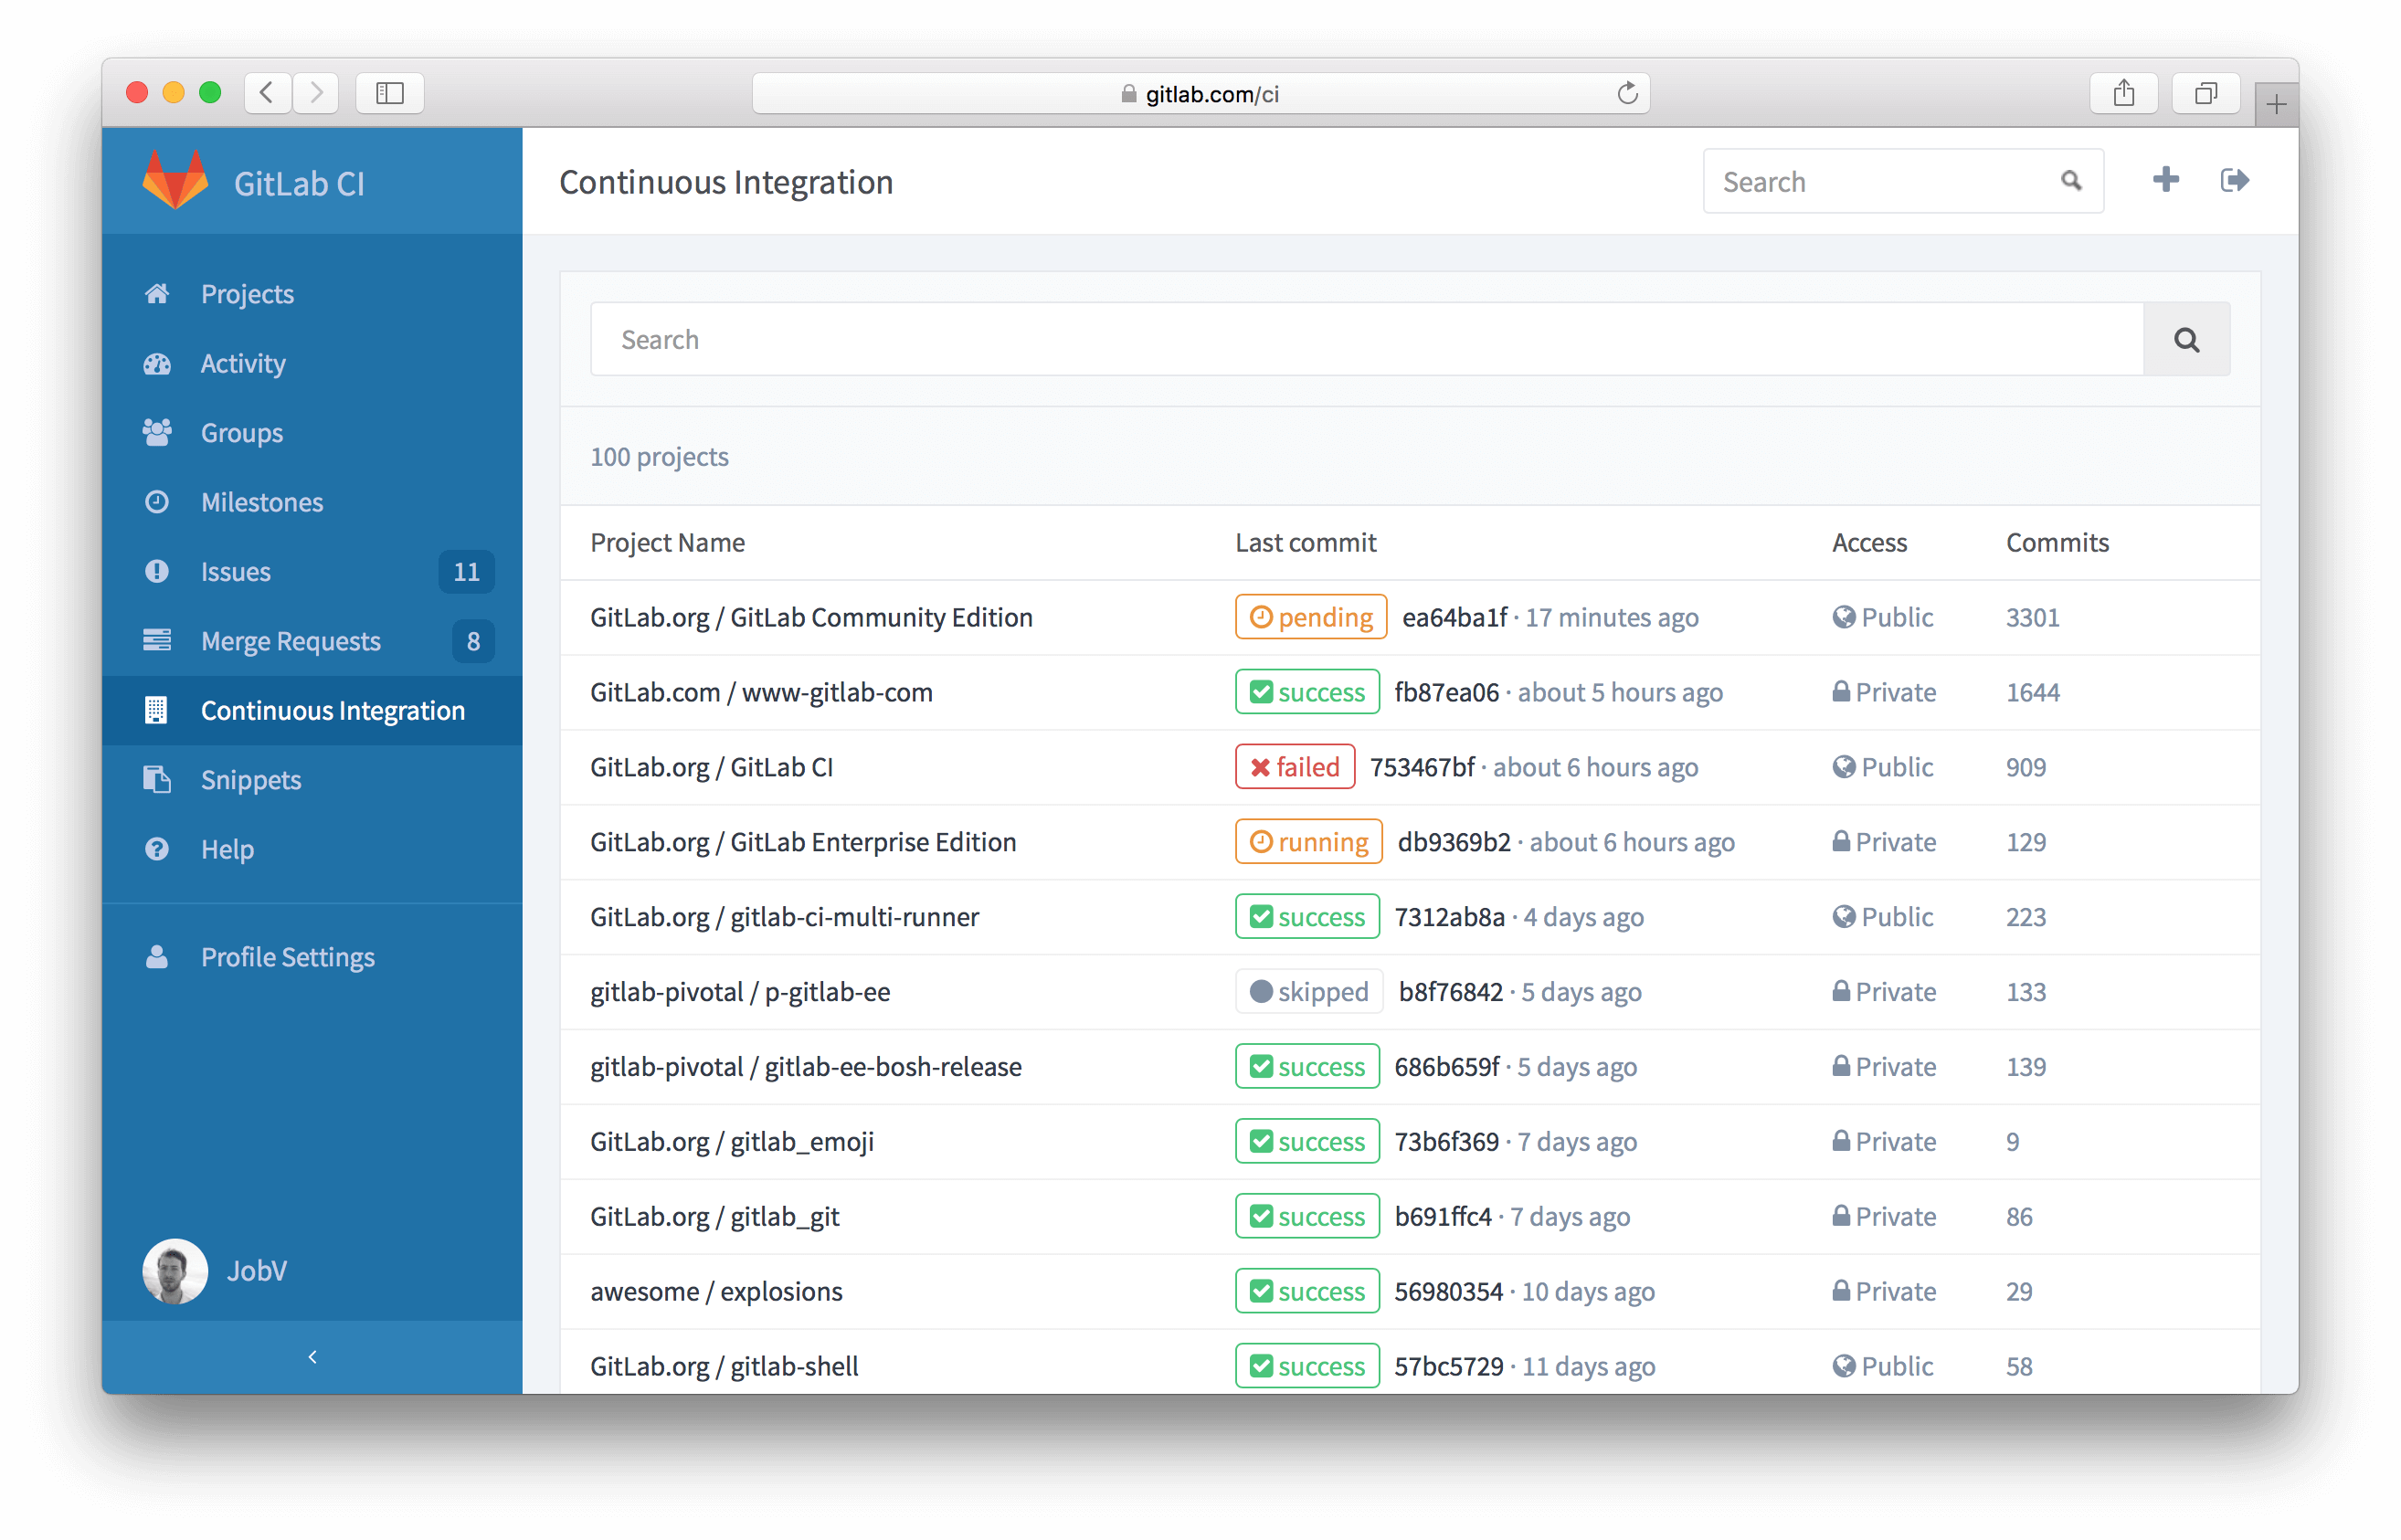 Continuous Integration in GitLab on the Dashboard